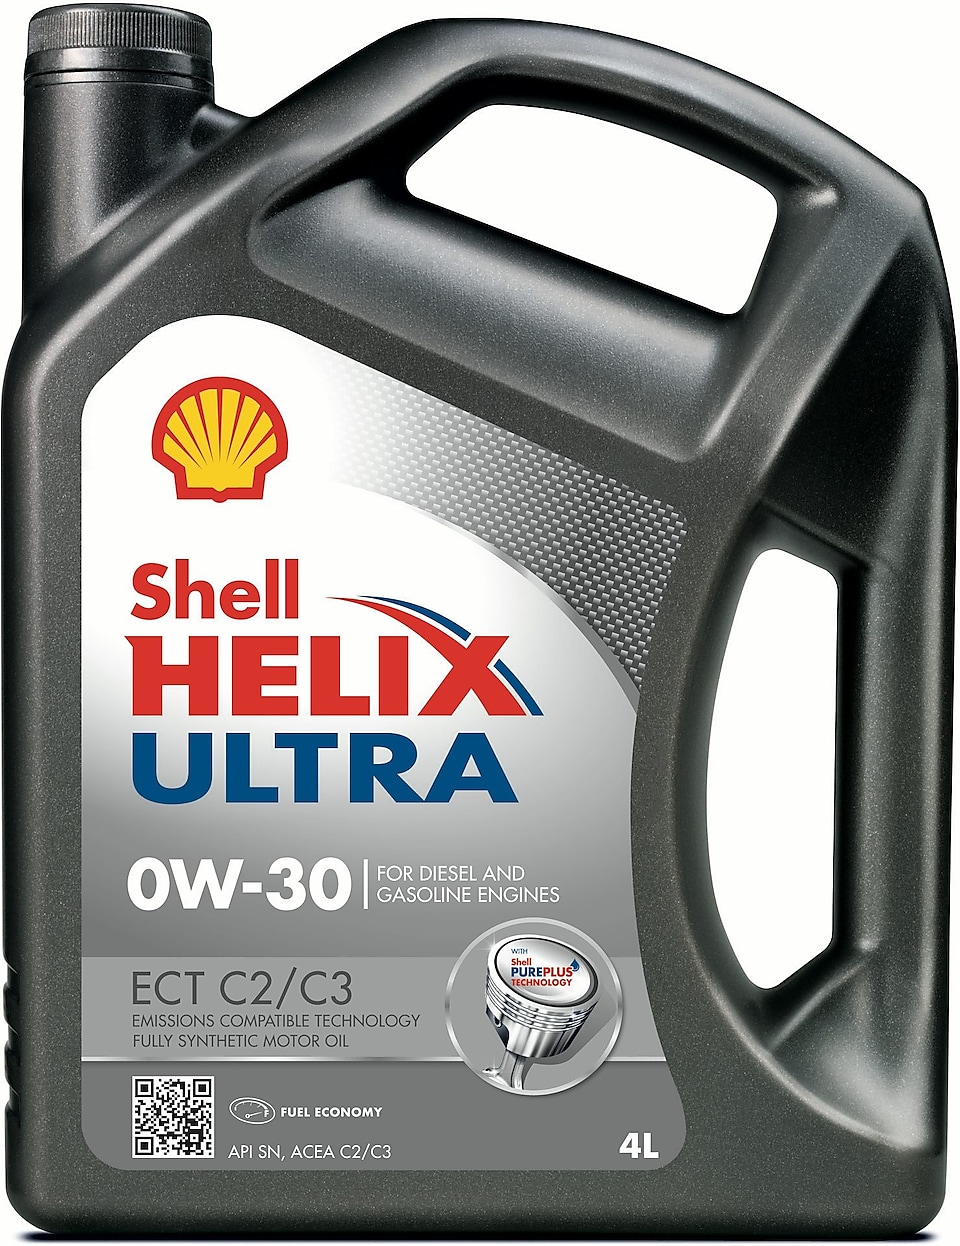 shell helix ultra ow-30